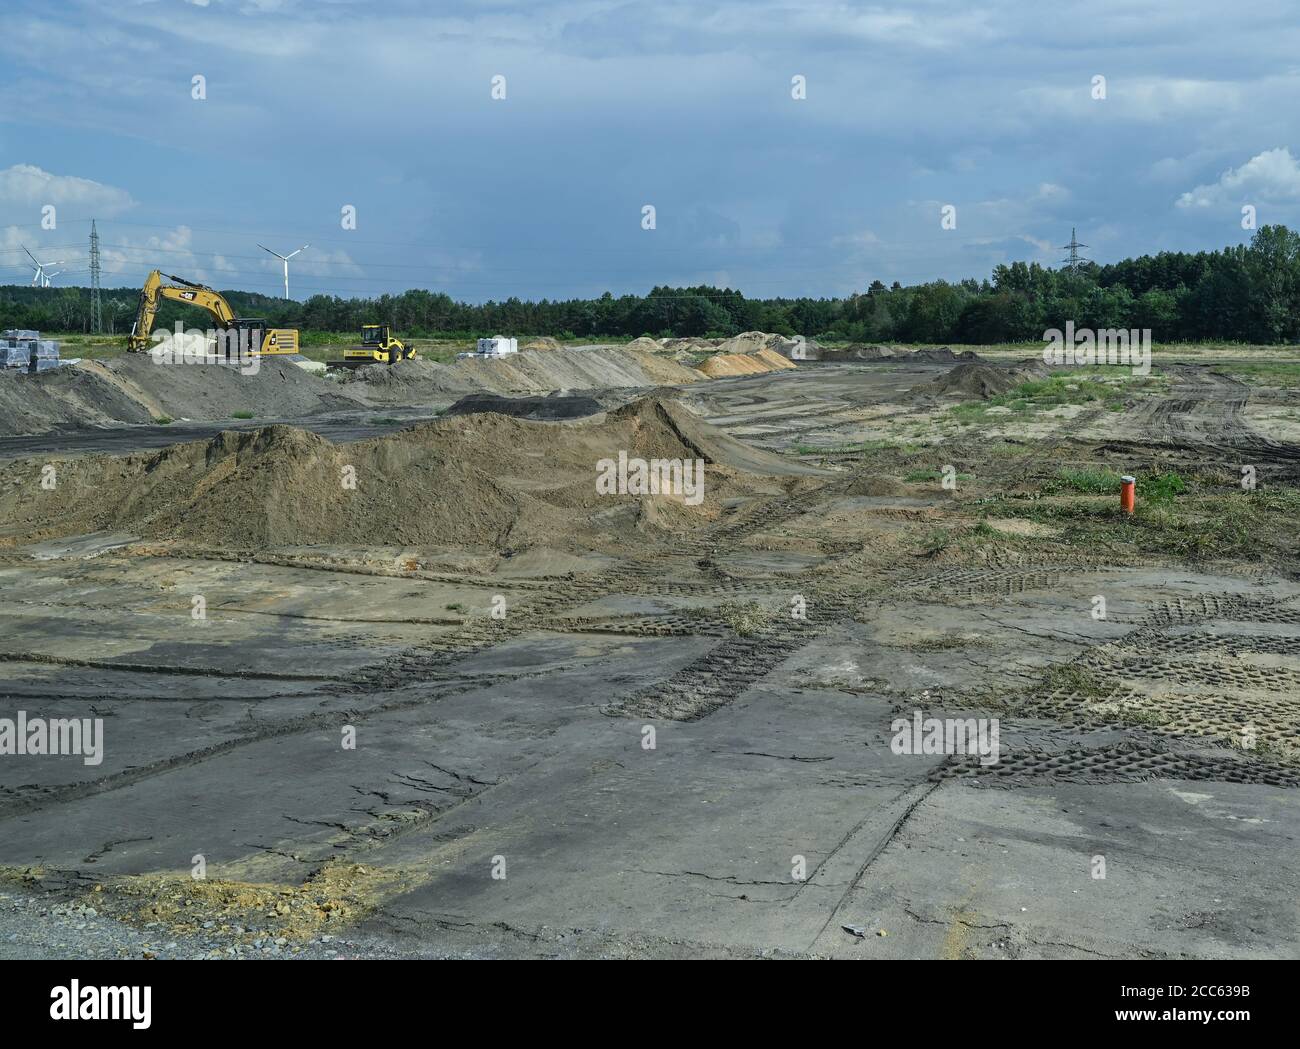 Basf Schwarzheide High Resolution Stock Photography and Images - Alamy